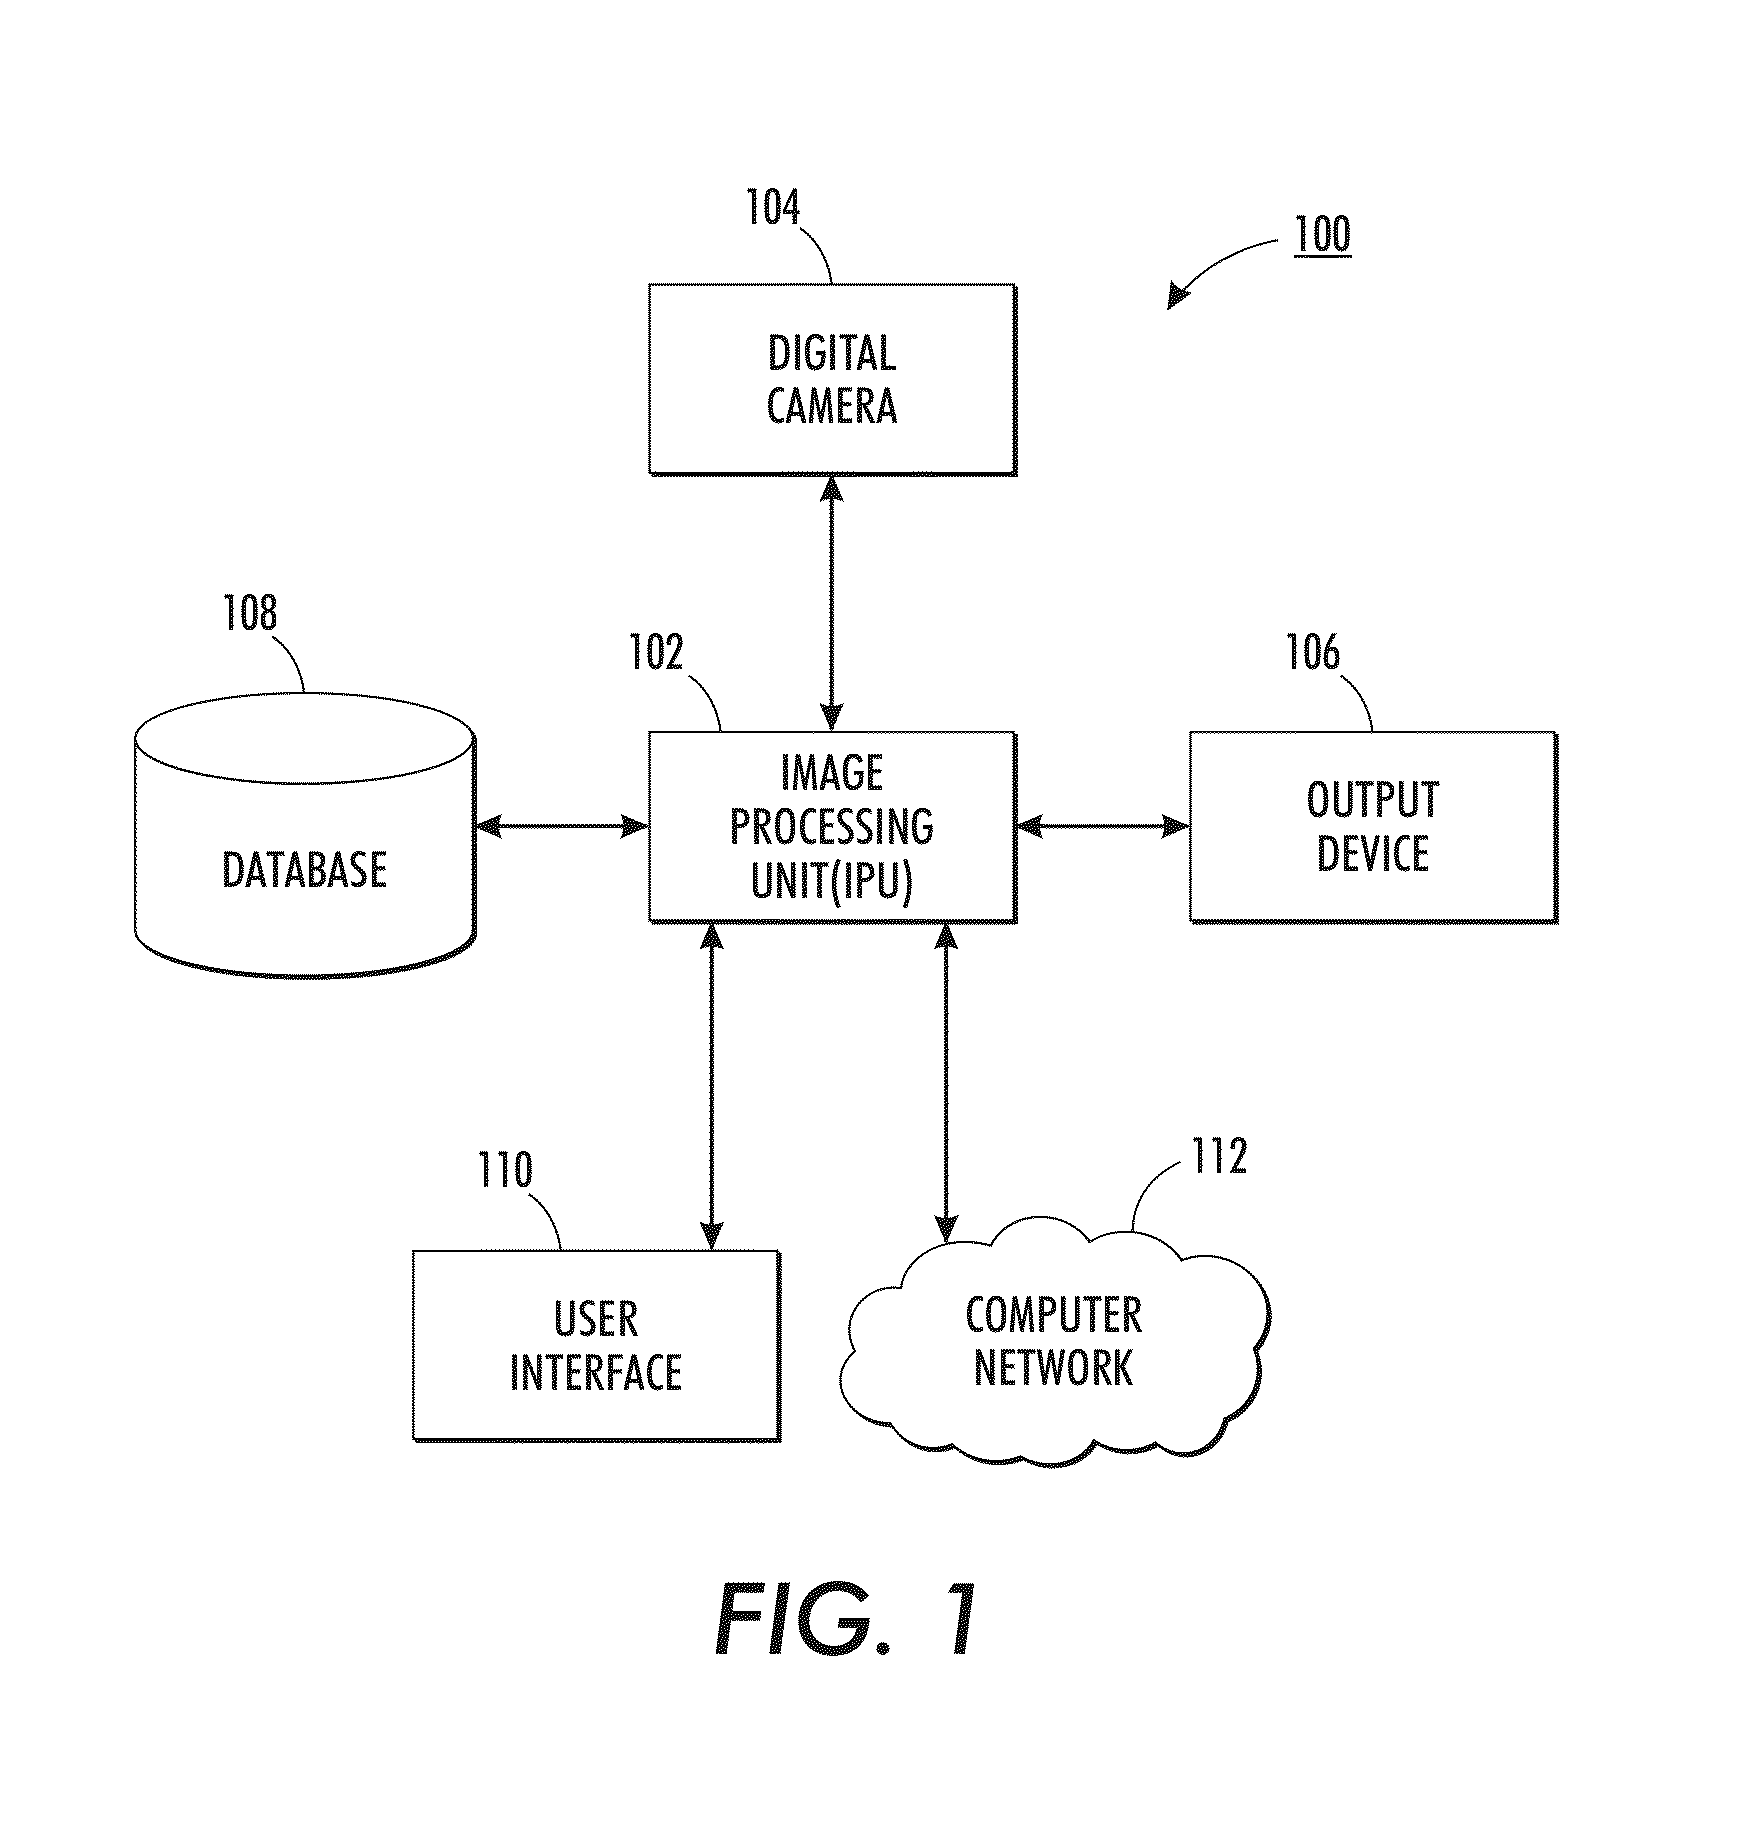 Method of determining parking lot occupancy from digital camera images